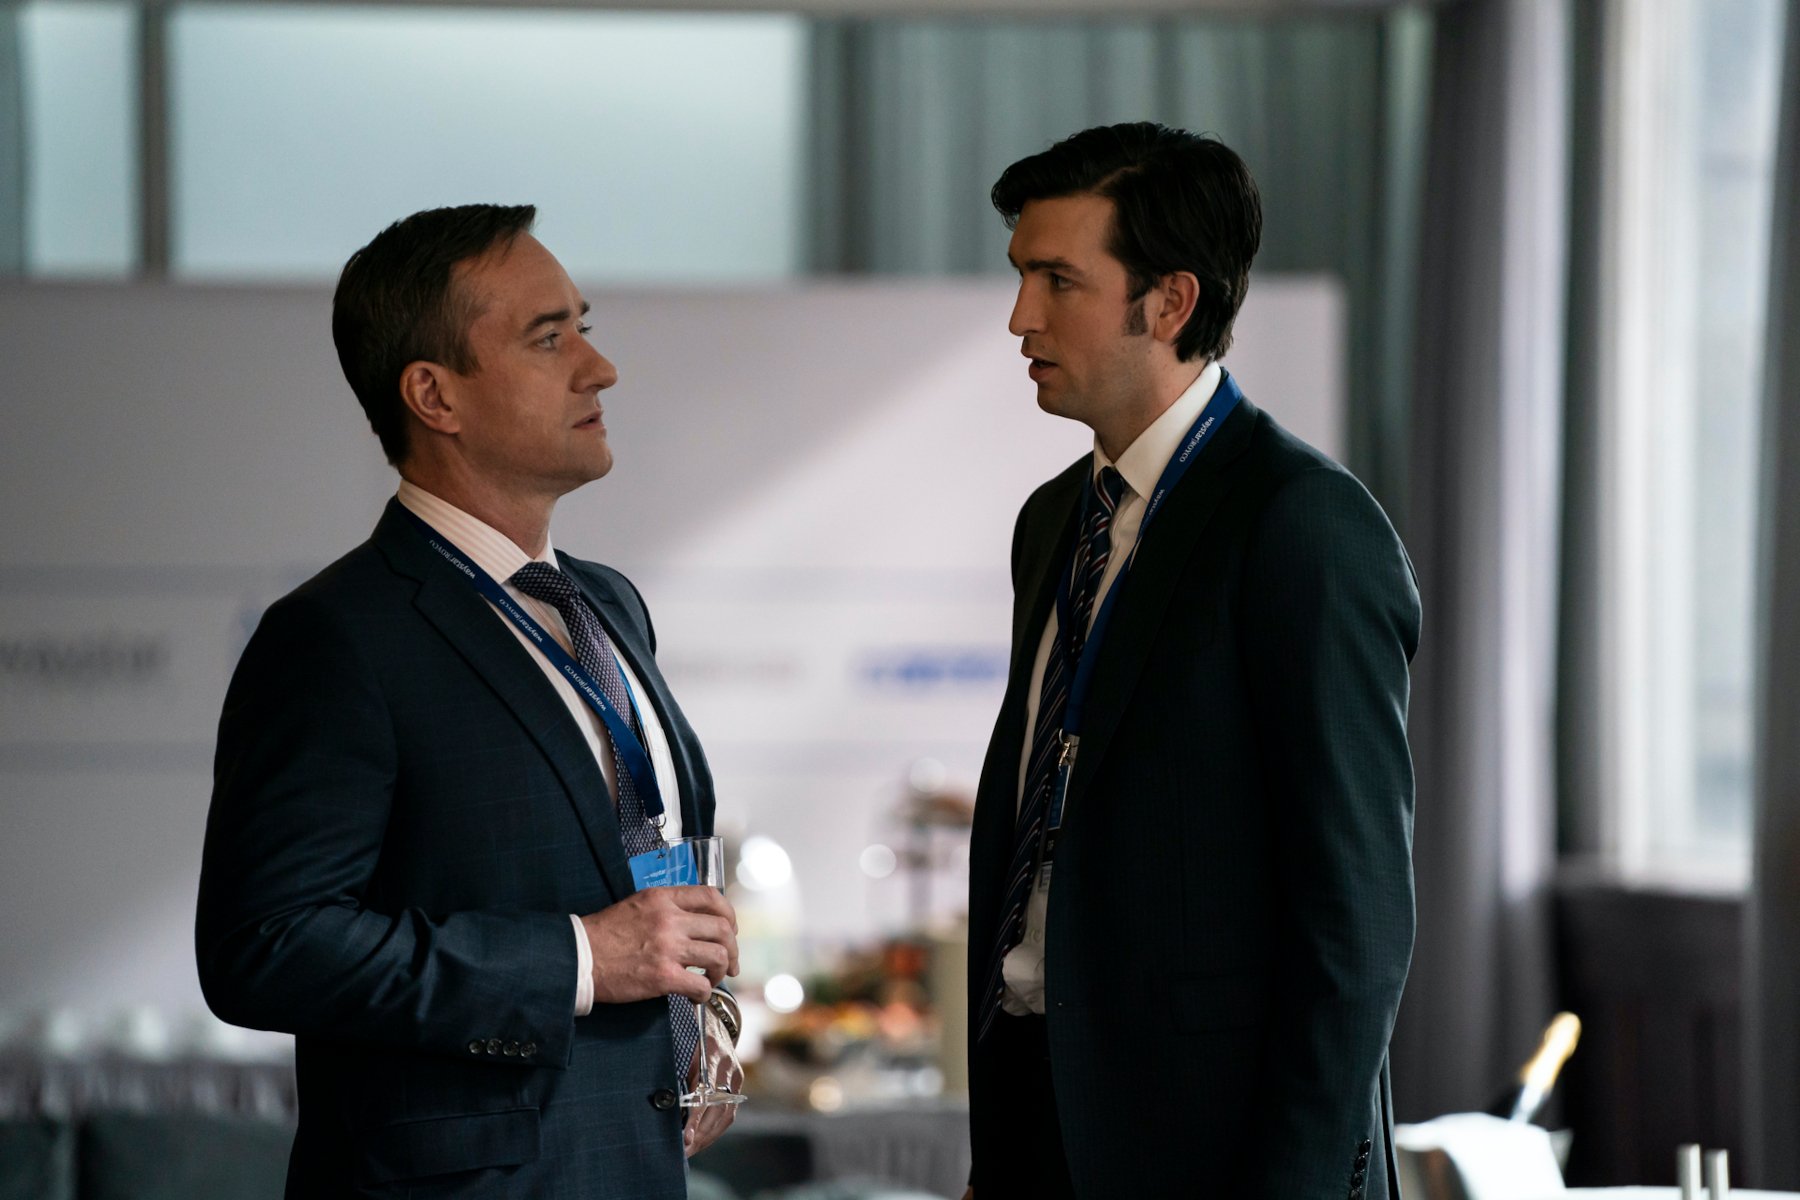 Matthew Macfadyen and Nicholas Braun as Tom and Cousin Greg in 'Succession' Season 3. They're both wearing suits and looking at one another.